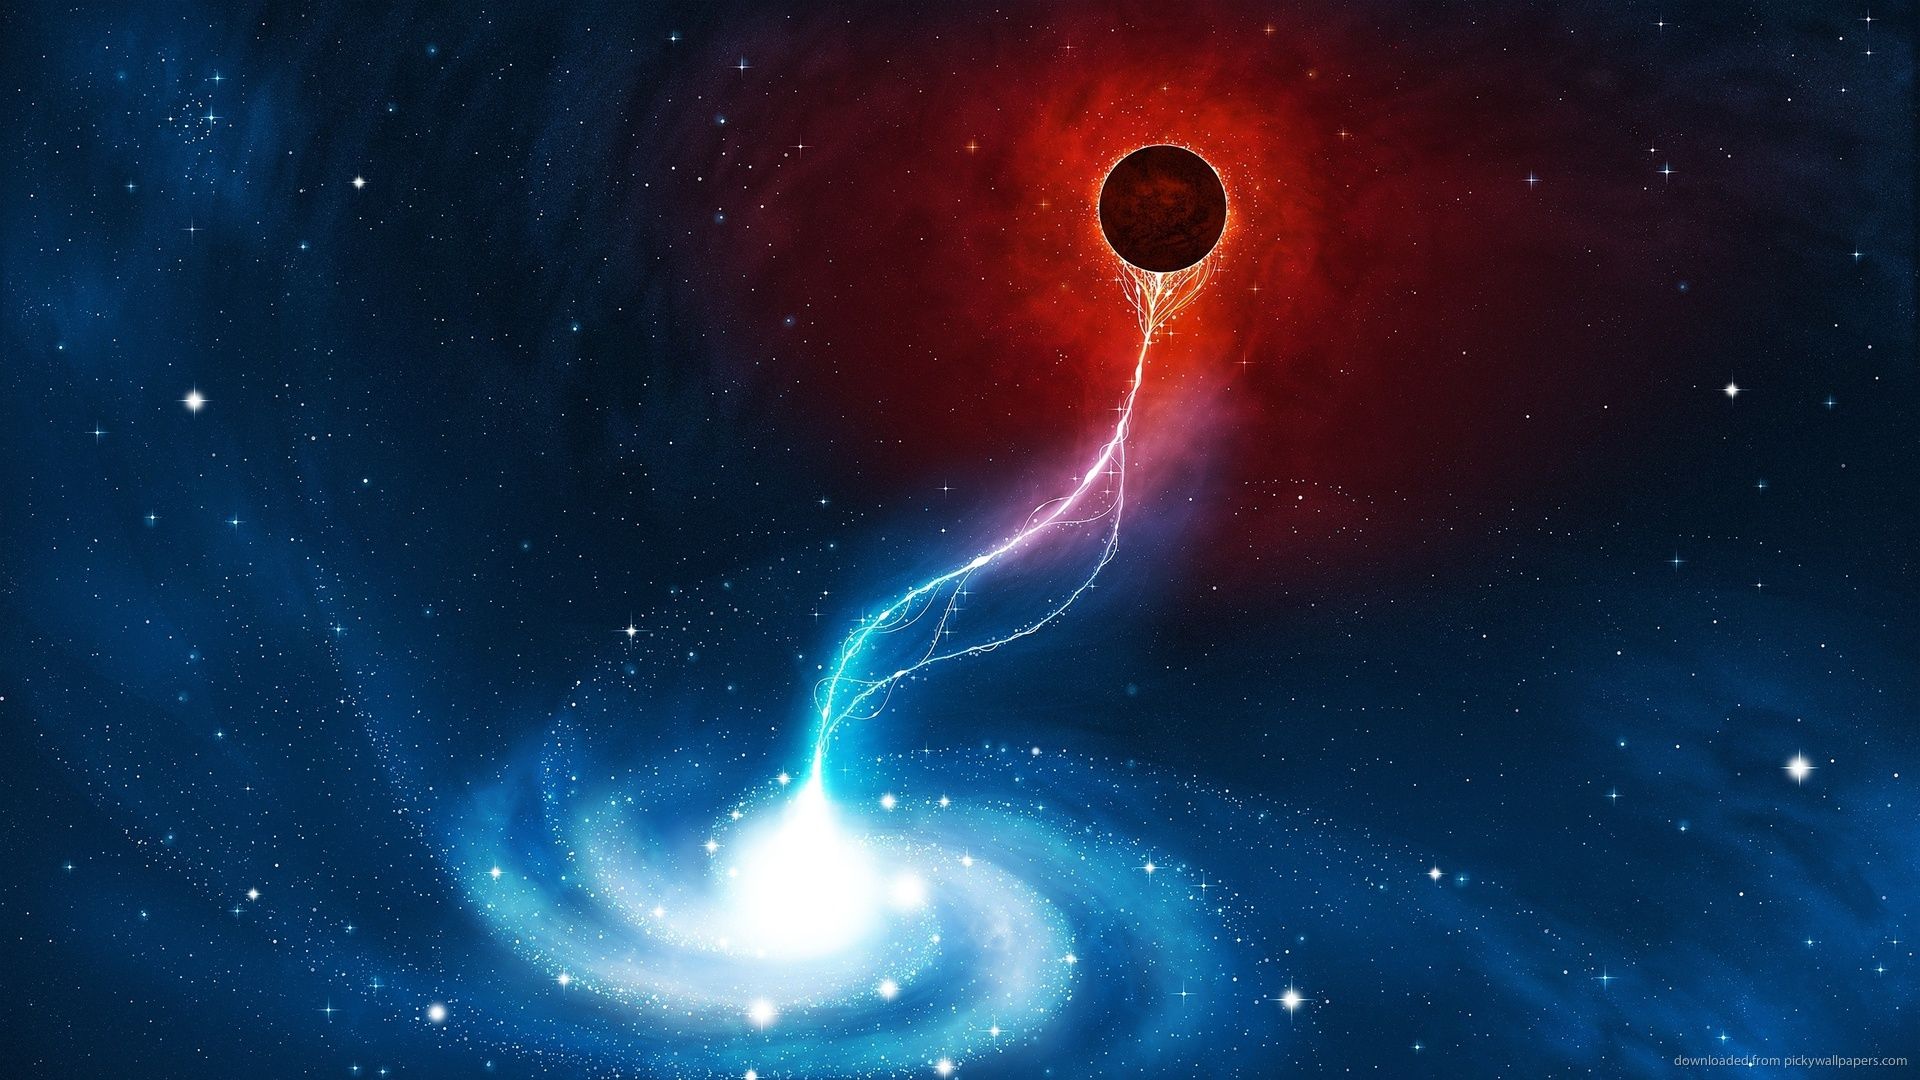 Download 1920x1080 Space Black Hole Wallpaper